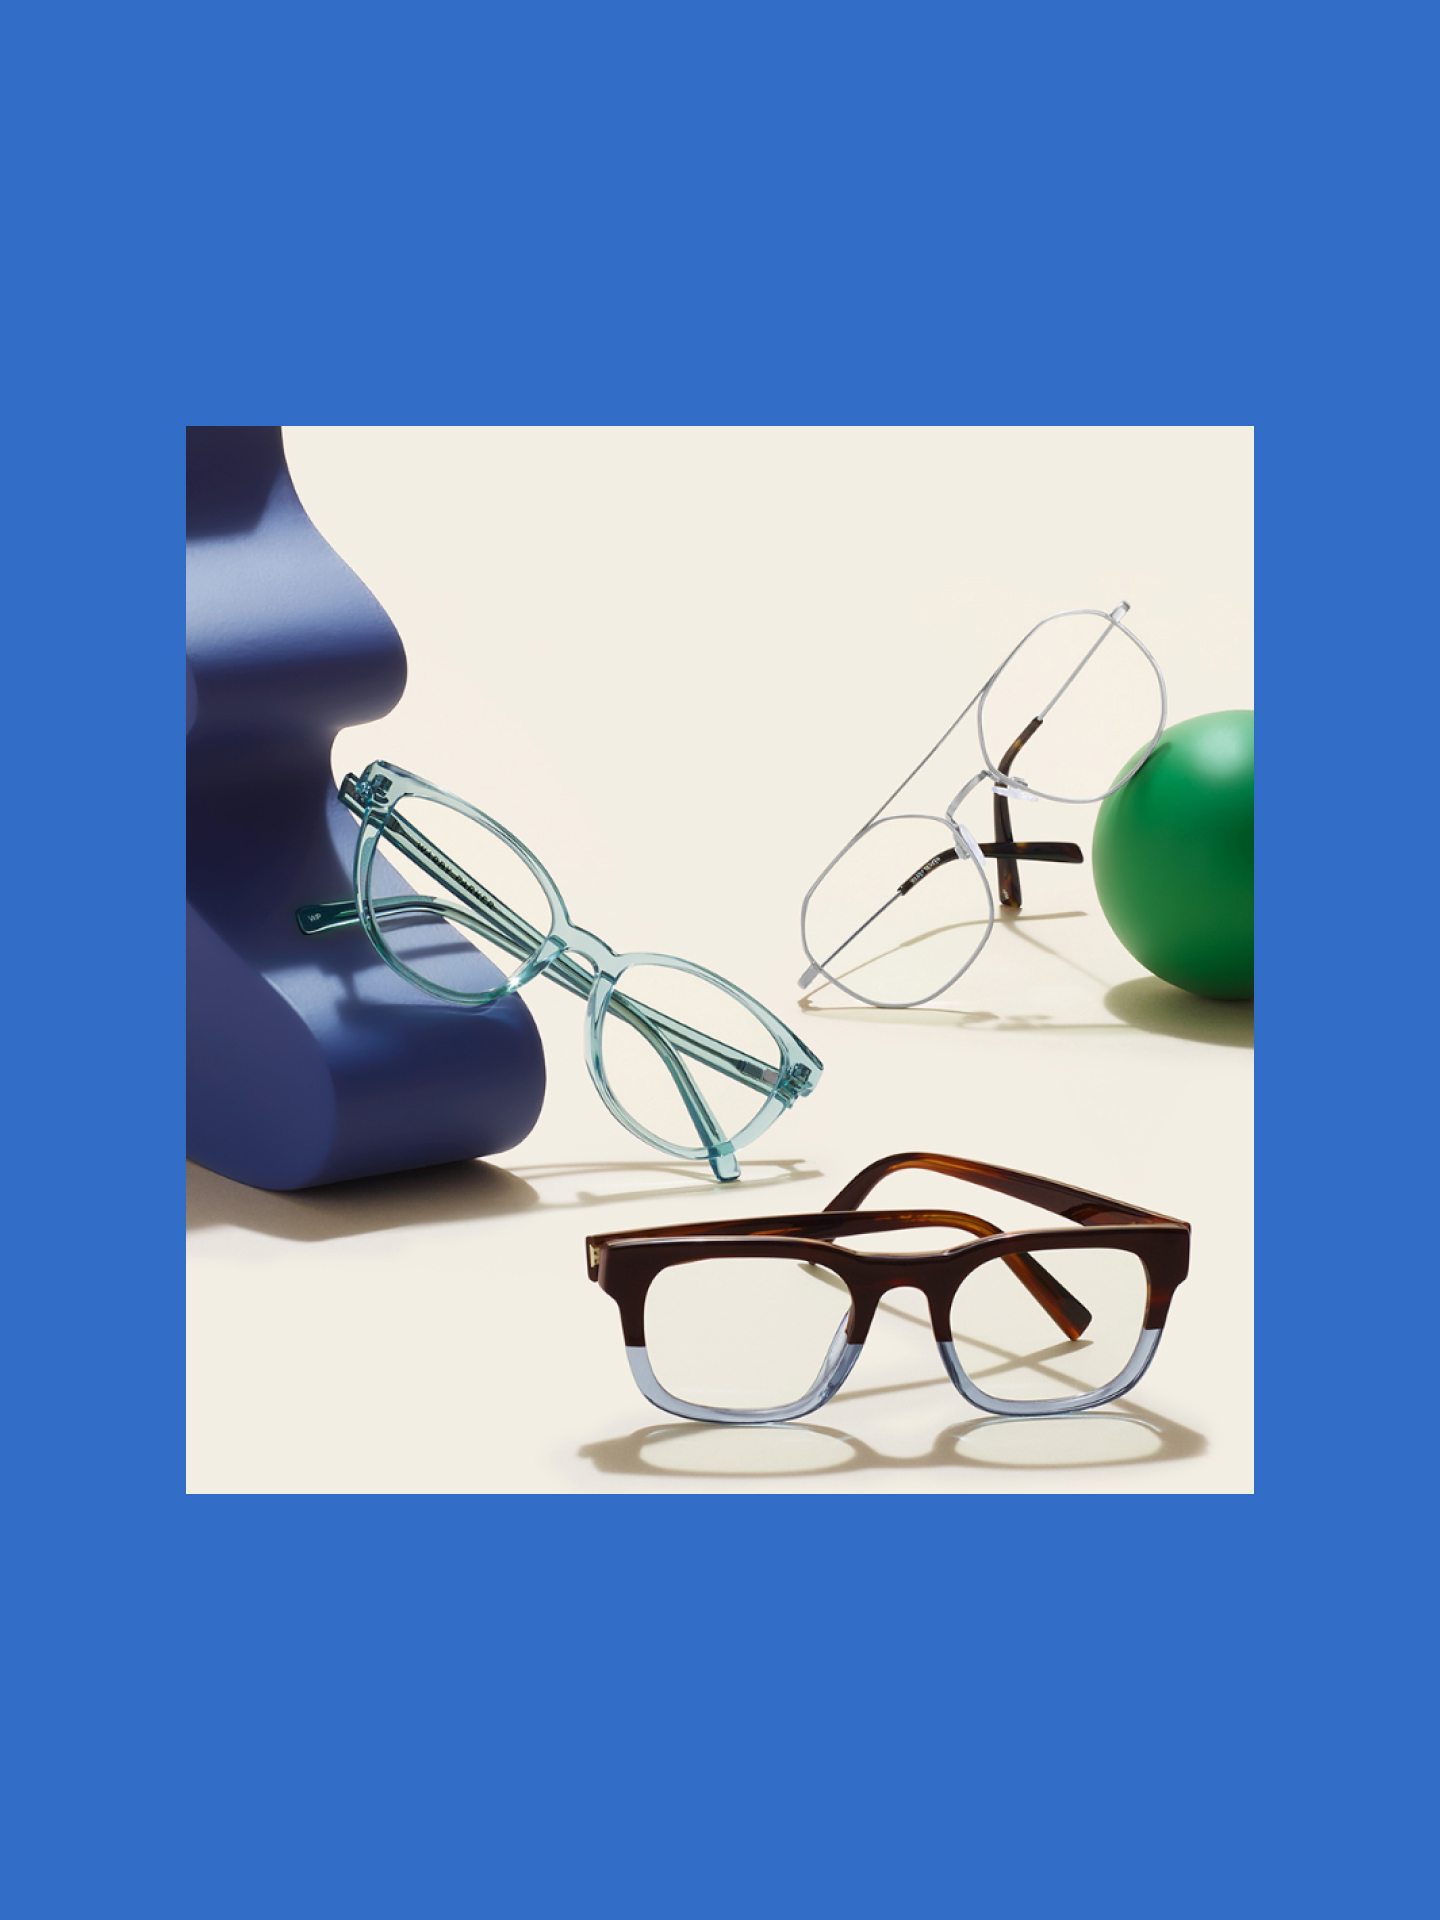 Clockwise from top: the Renaldo frame in Antique Silver, the Connor frame in Eastern Bluebird Fade, and the Elodie frame in Reef Crystal.